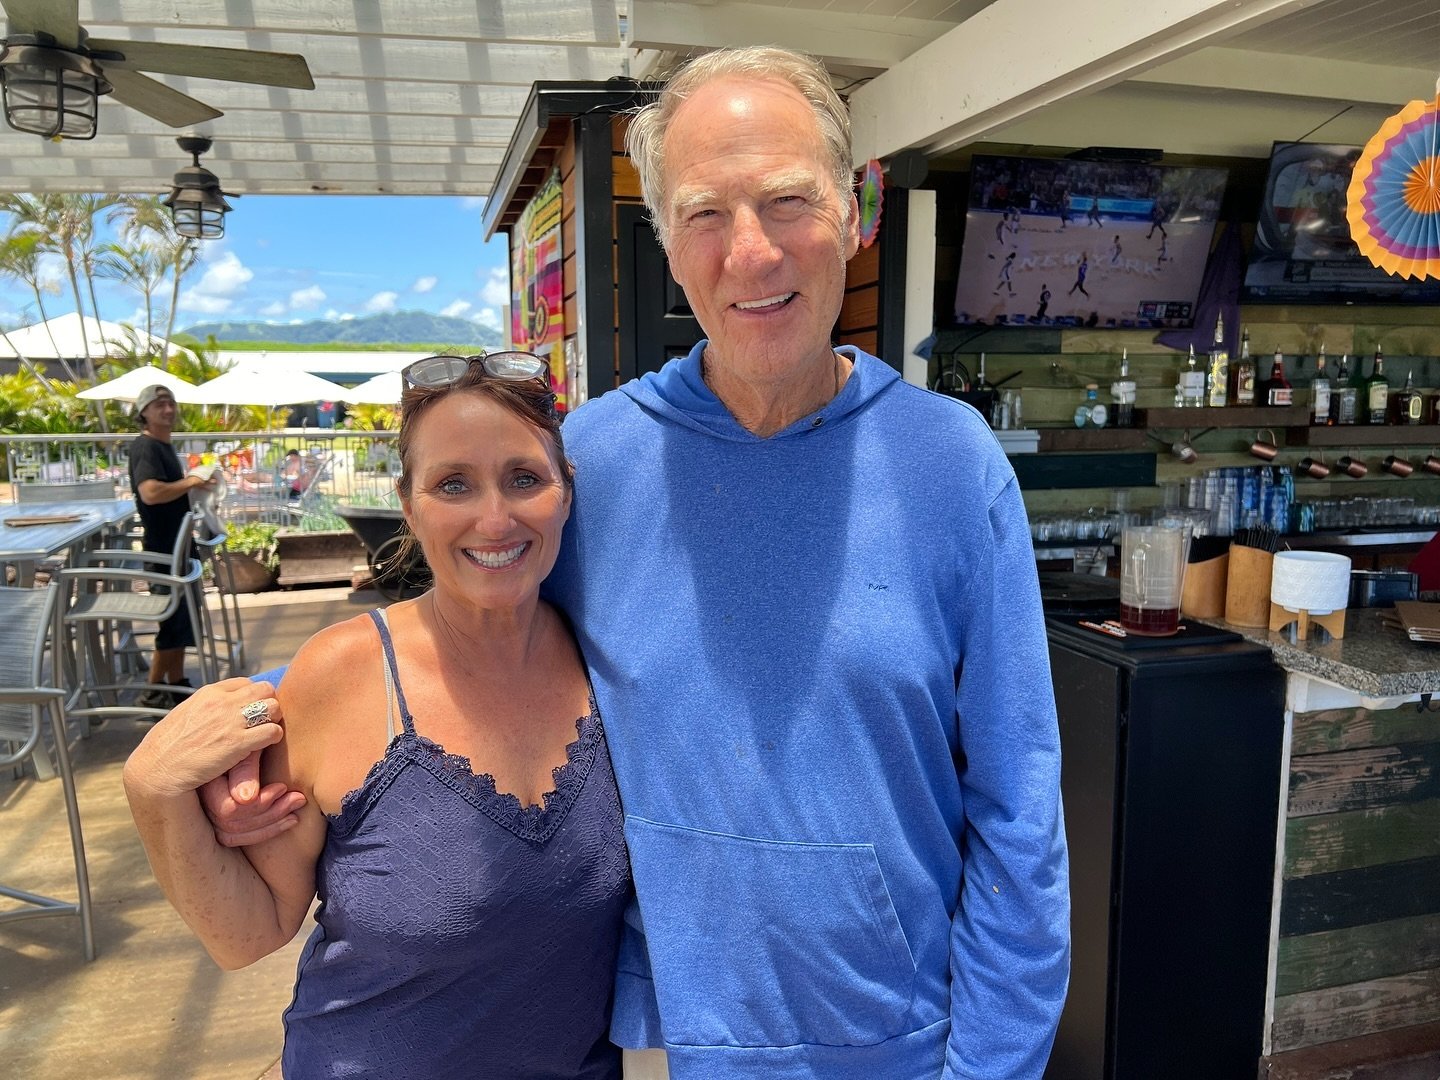 I think it&rsquo;s time to start a celebrity wall! I was soooo excited to see Craig T Nelson @thecabanakauai especially because Nash &amp; I are watching @youngsheldoncbs @youngsheldonfeeds he is sooo talented! #greatday #hiddengem #cabanalife #bless